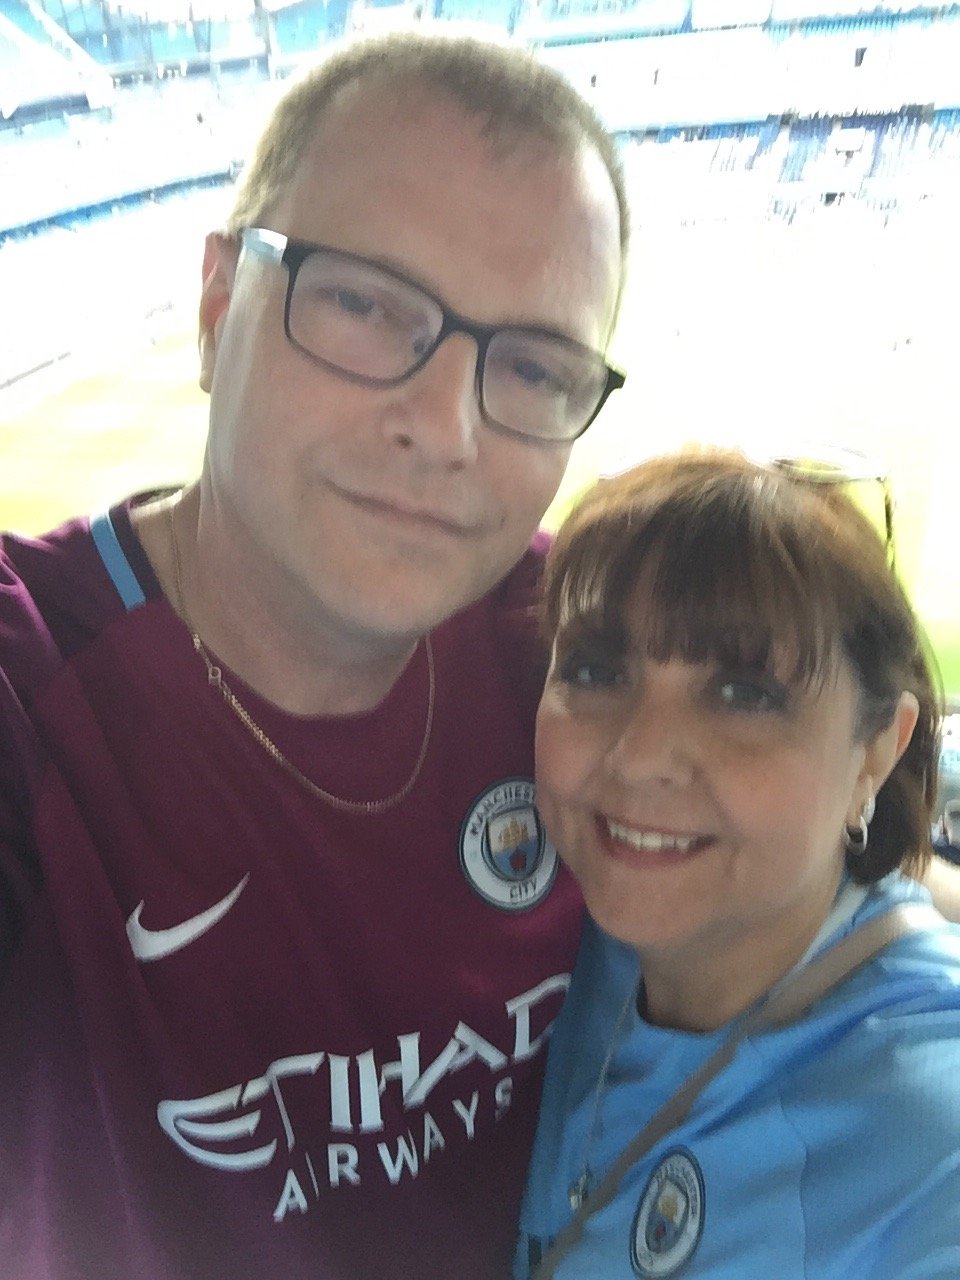 Man City fan, season ticket holder. Diagnosed April ‘18 with Stage 4 bowel cancer confirmed terminal Oct ‘18 😢. Making the most of time left. Fellow Ostomate.